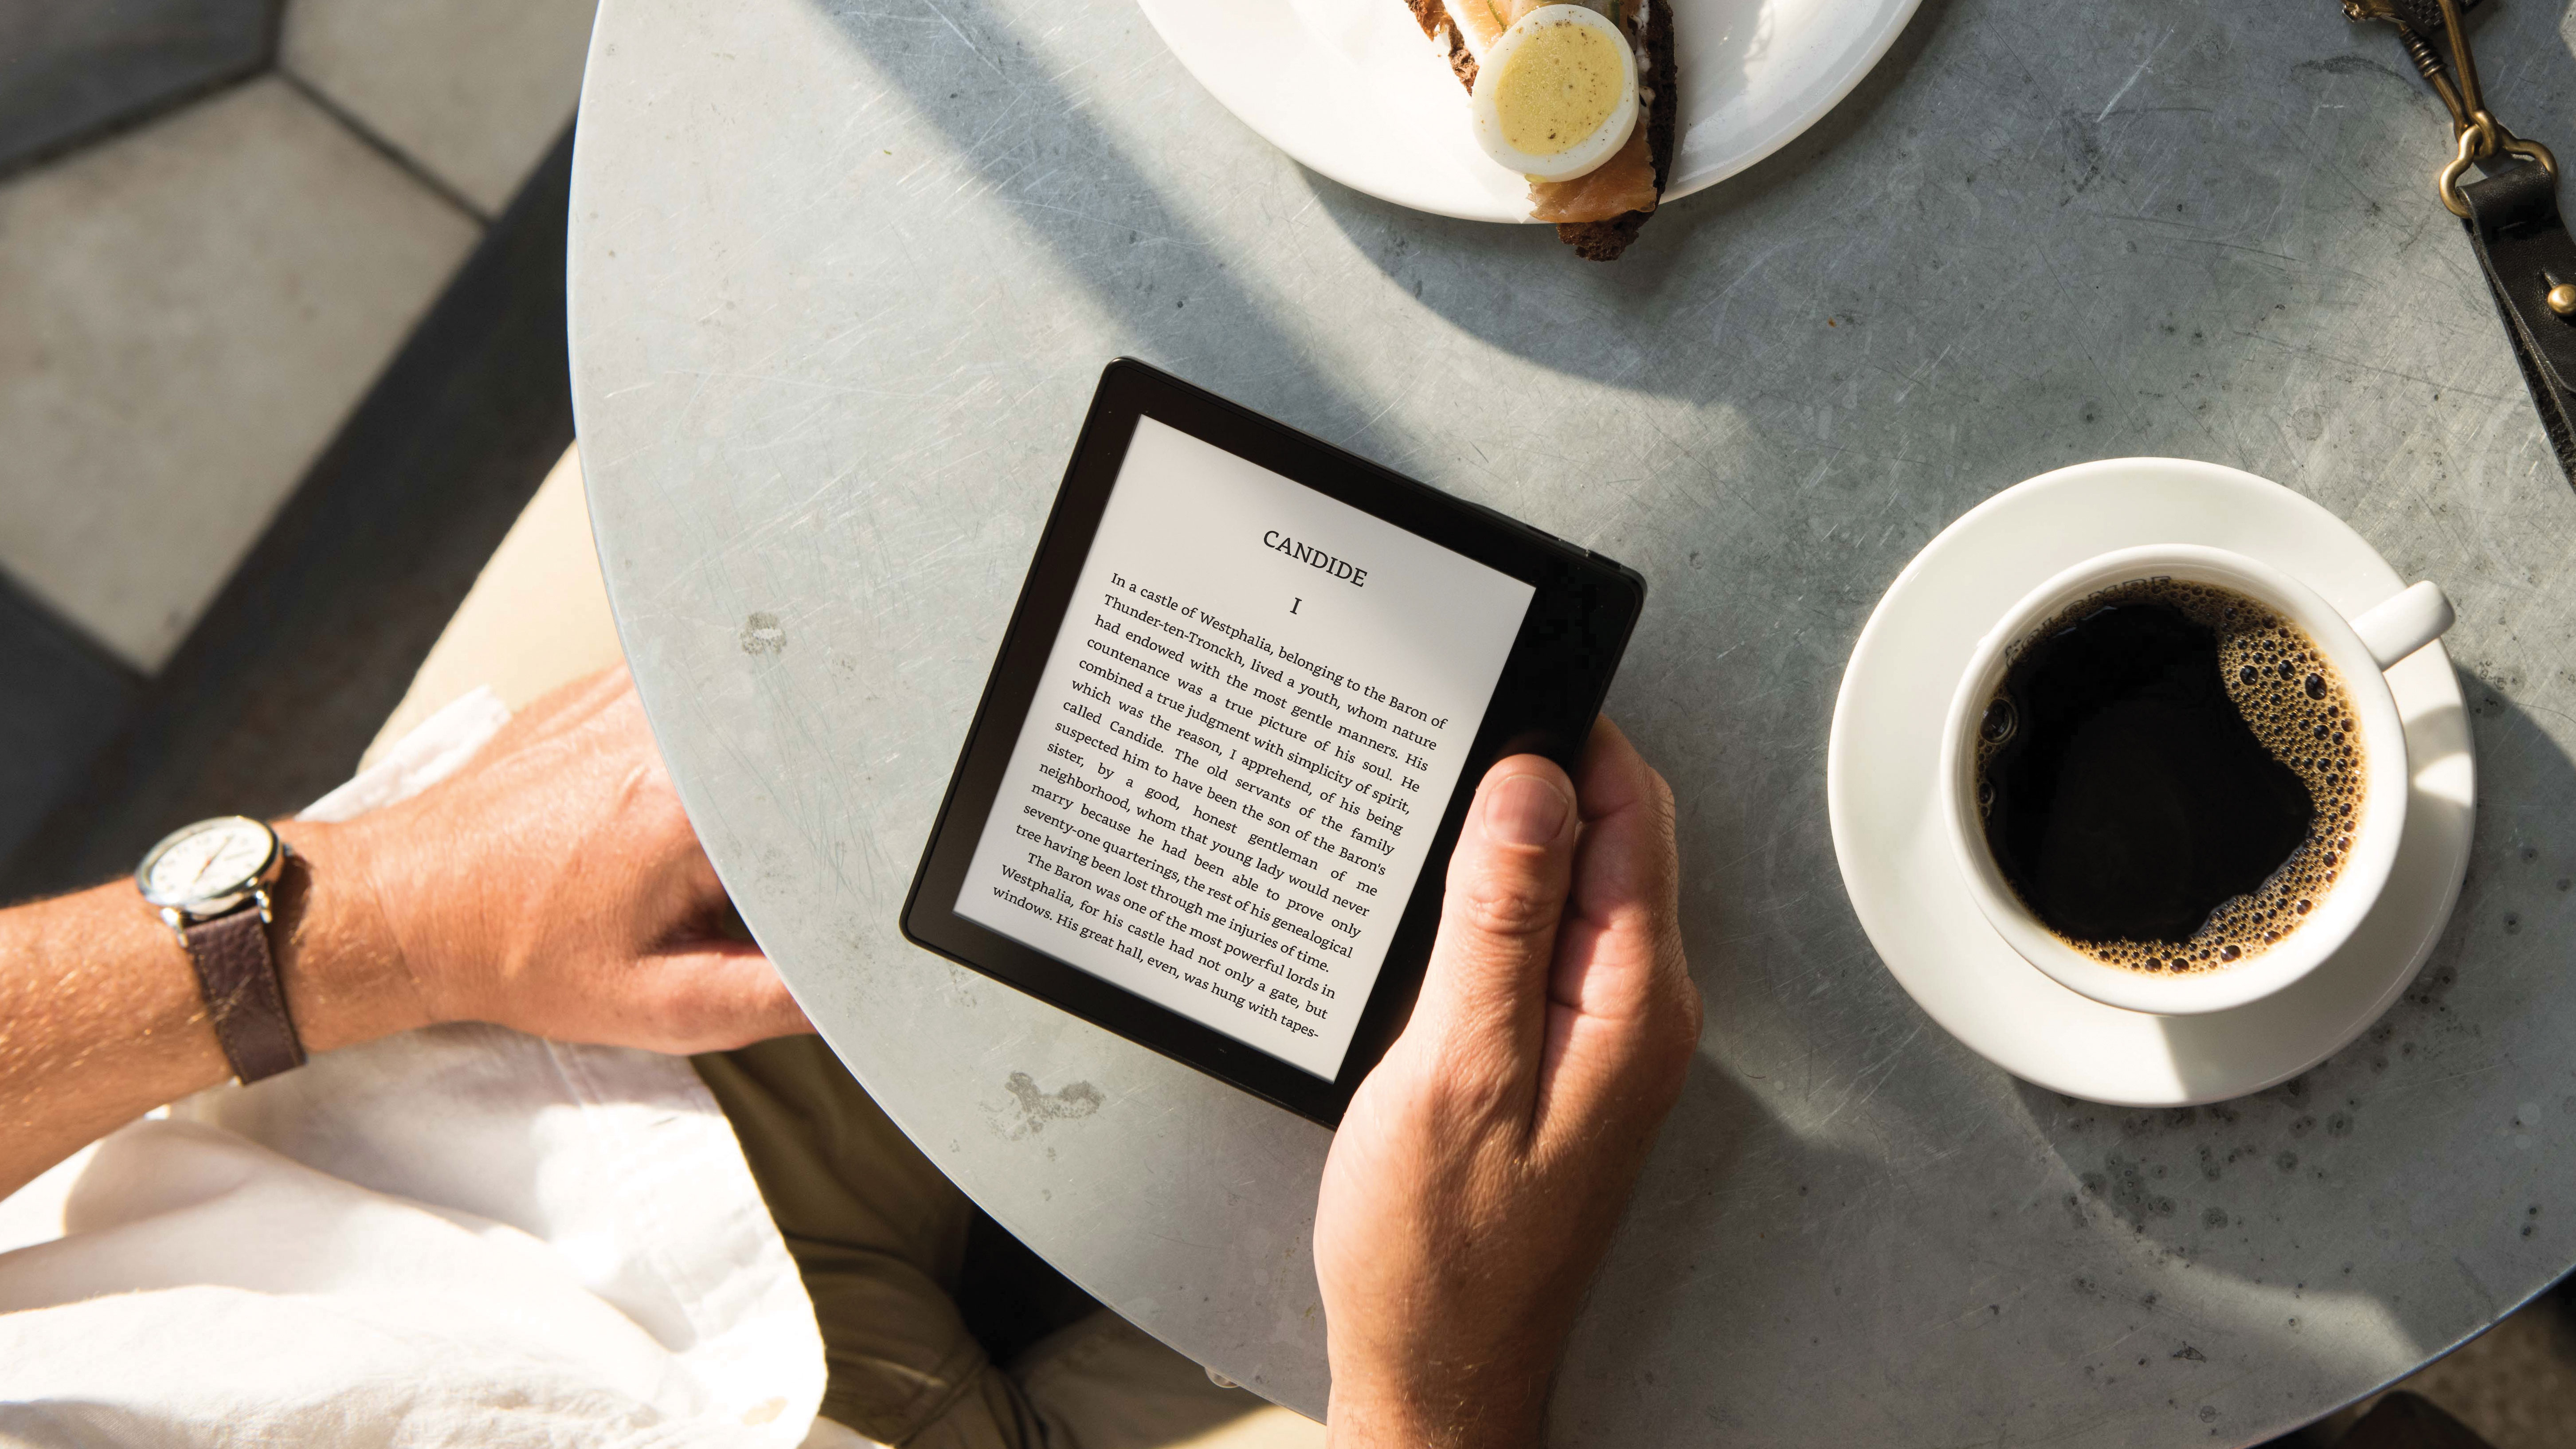 The Kindle Oasis being read as someone drinks coffee at a table